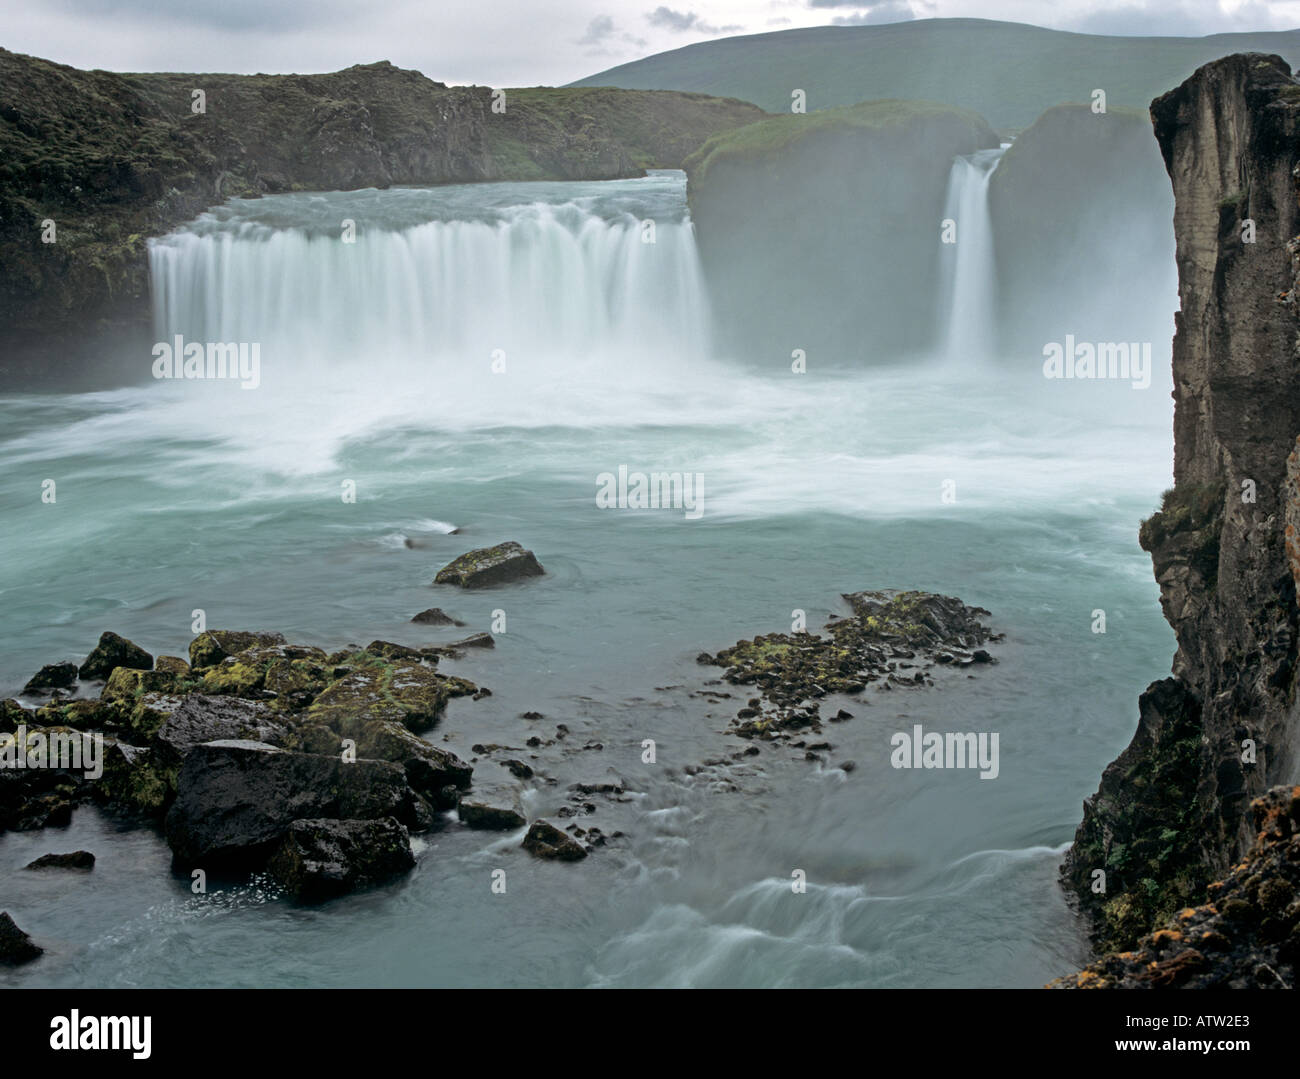 GODAFOSS ICELAND EUROPE July Mighty horseshoe falls throw spray high in the air visible from the approach road Stock Photo